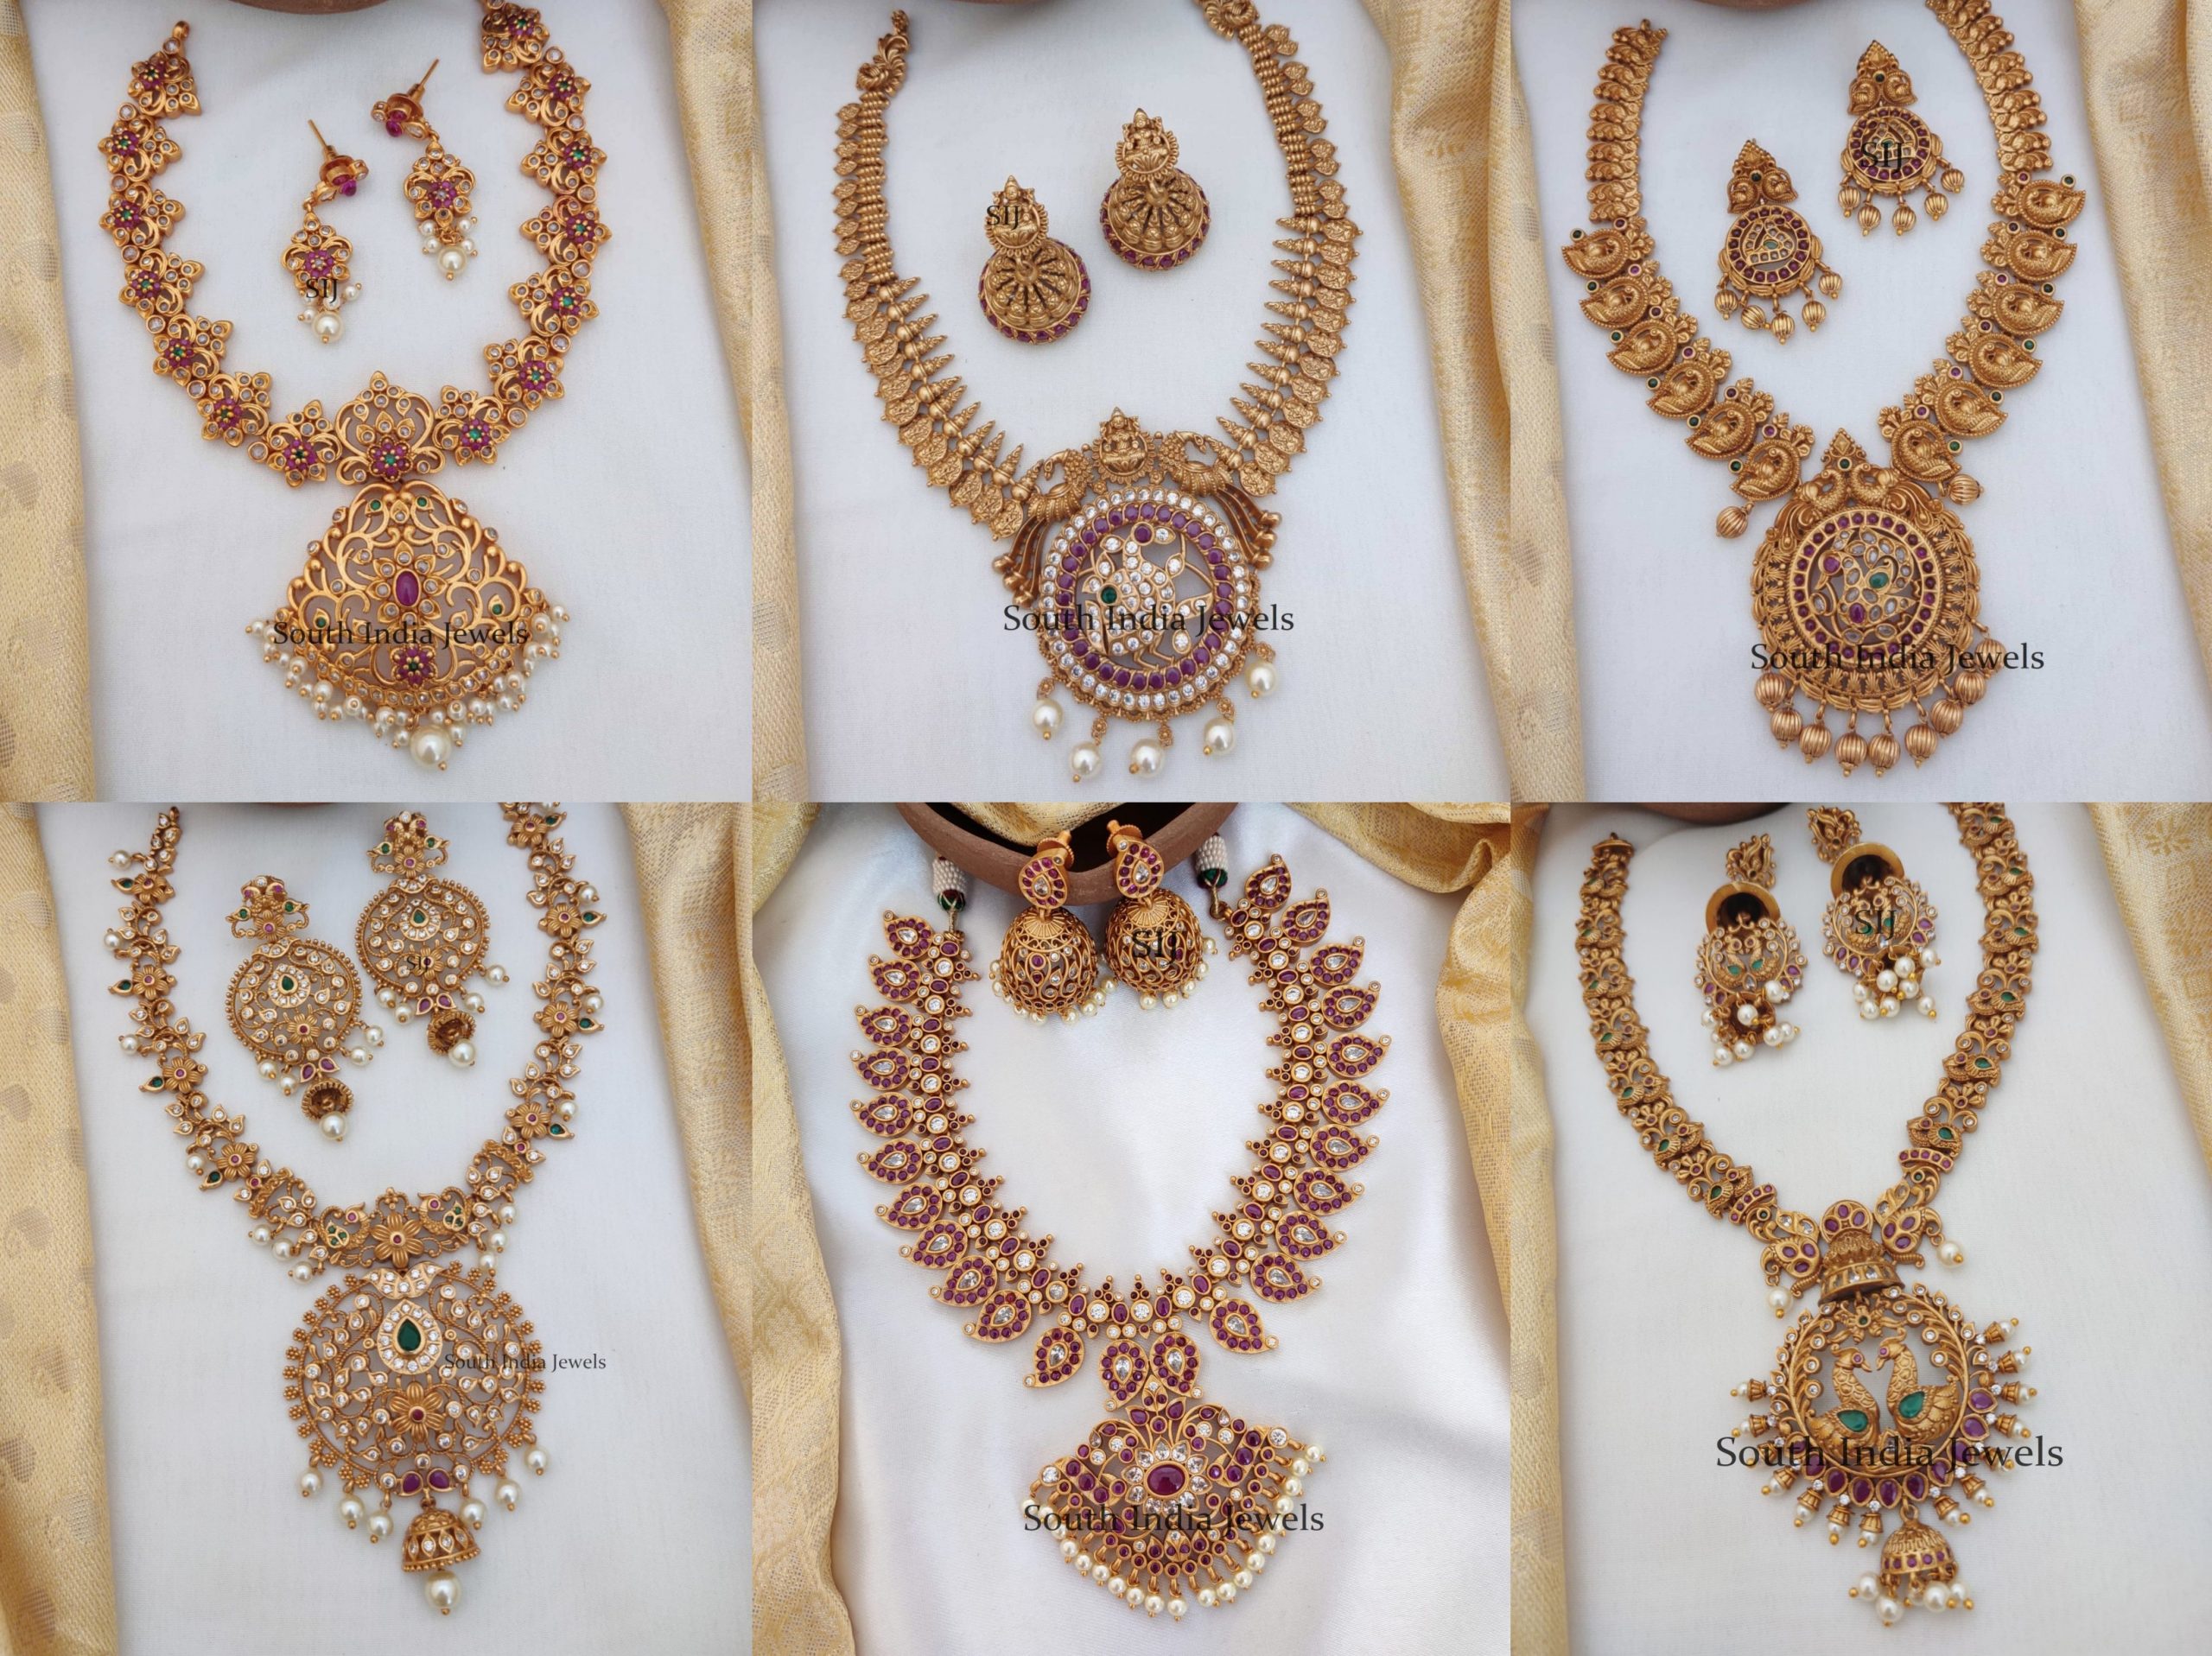 Stunning Imitation Necklaces For Festivals By South India Jewels!